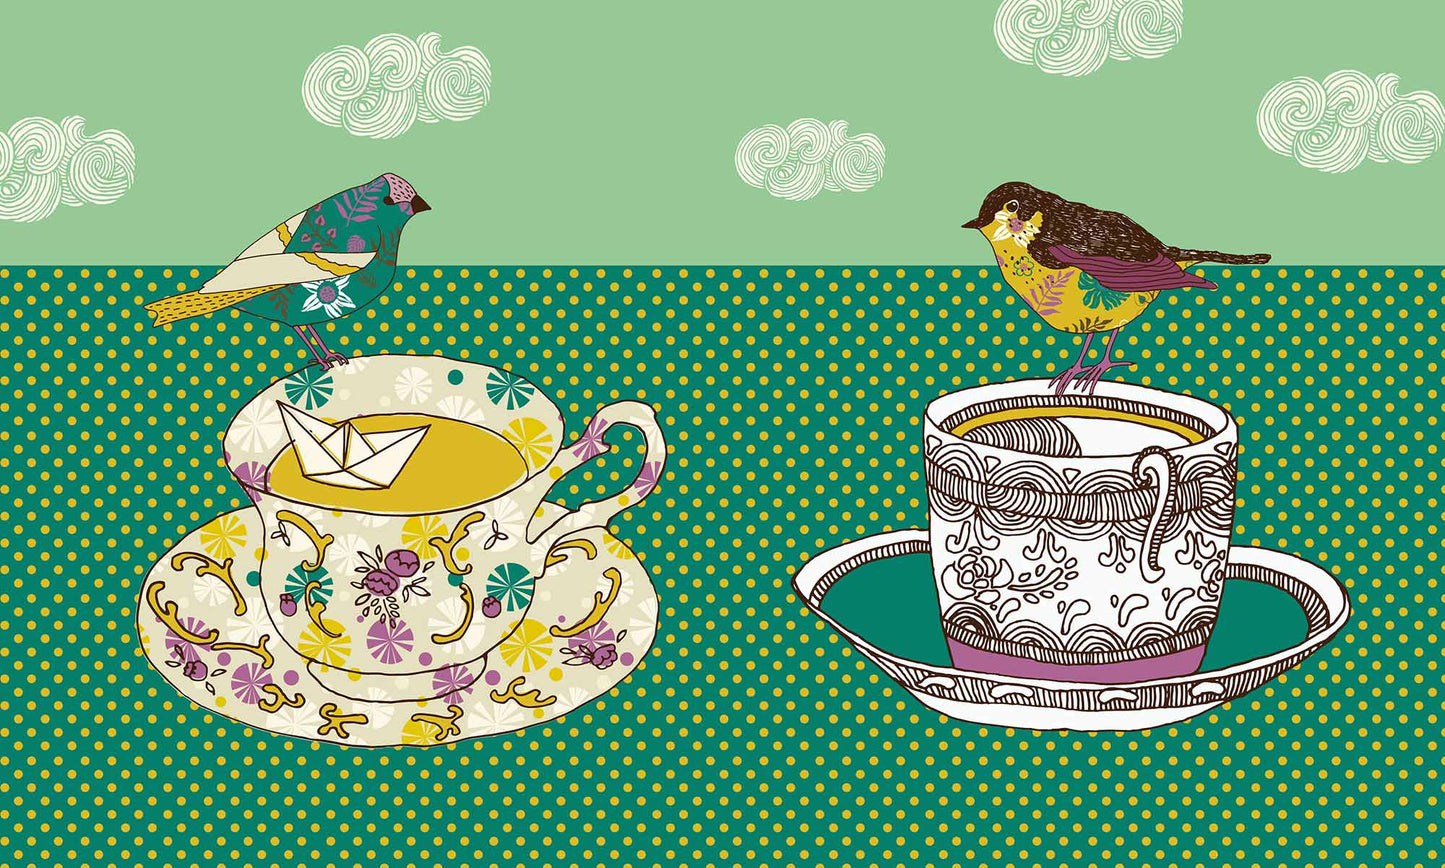 Wallpaper mural with Teapots and Birds for Home Decoration